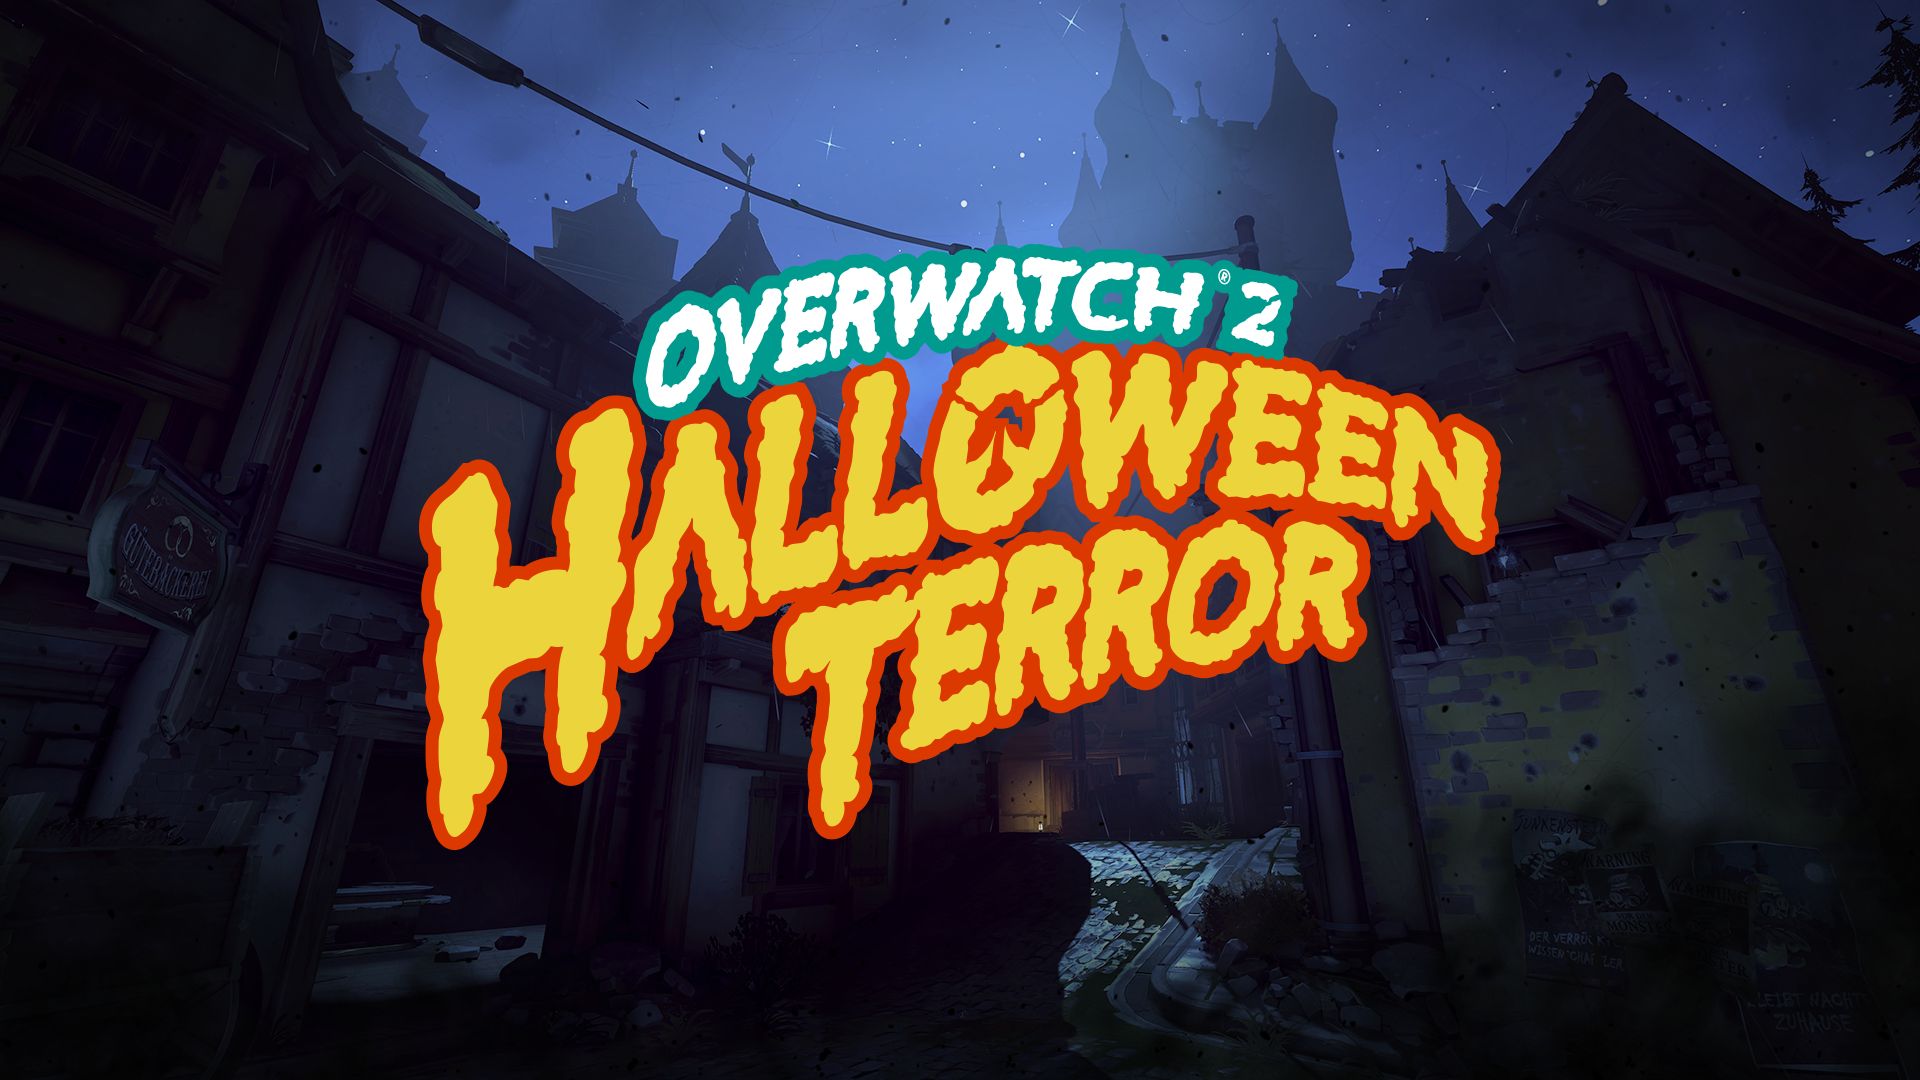 Return to Ghostly Gameplay in Overwatch 2's Halloween Terror - Xbox Wire